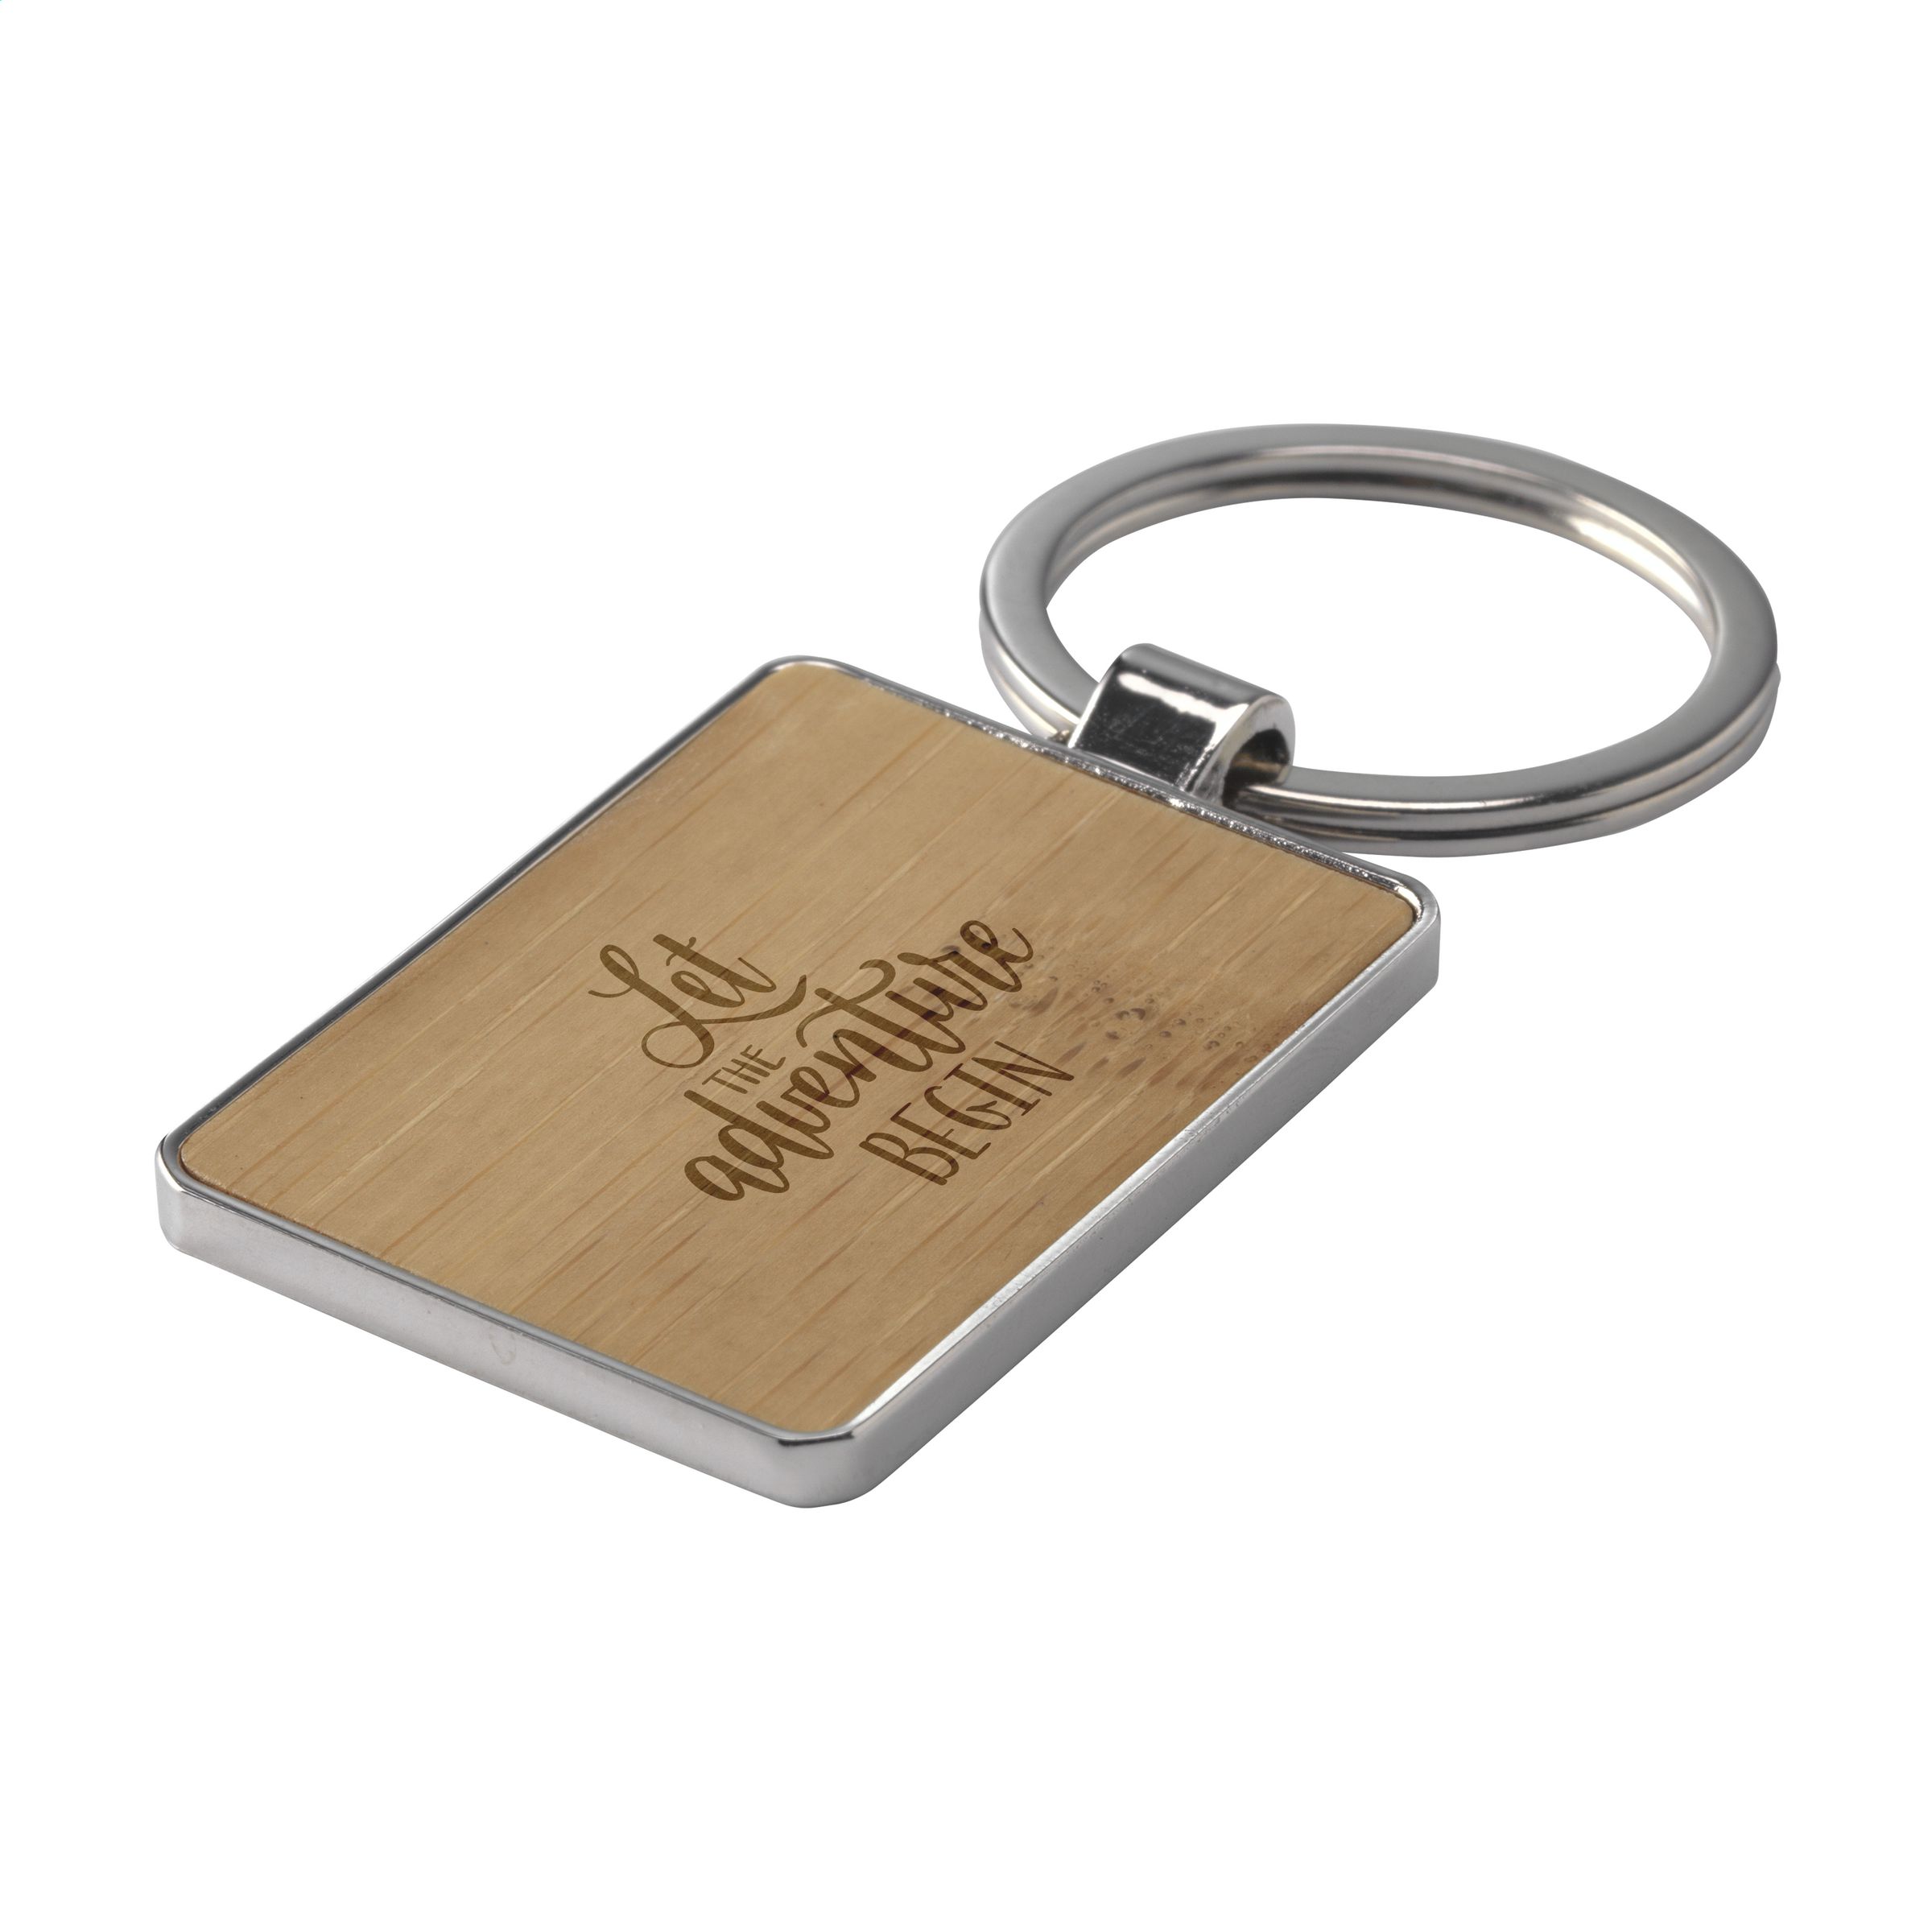 Metal keychain with bamboo inlays - Stoke Poges - Stafford